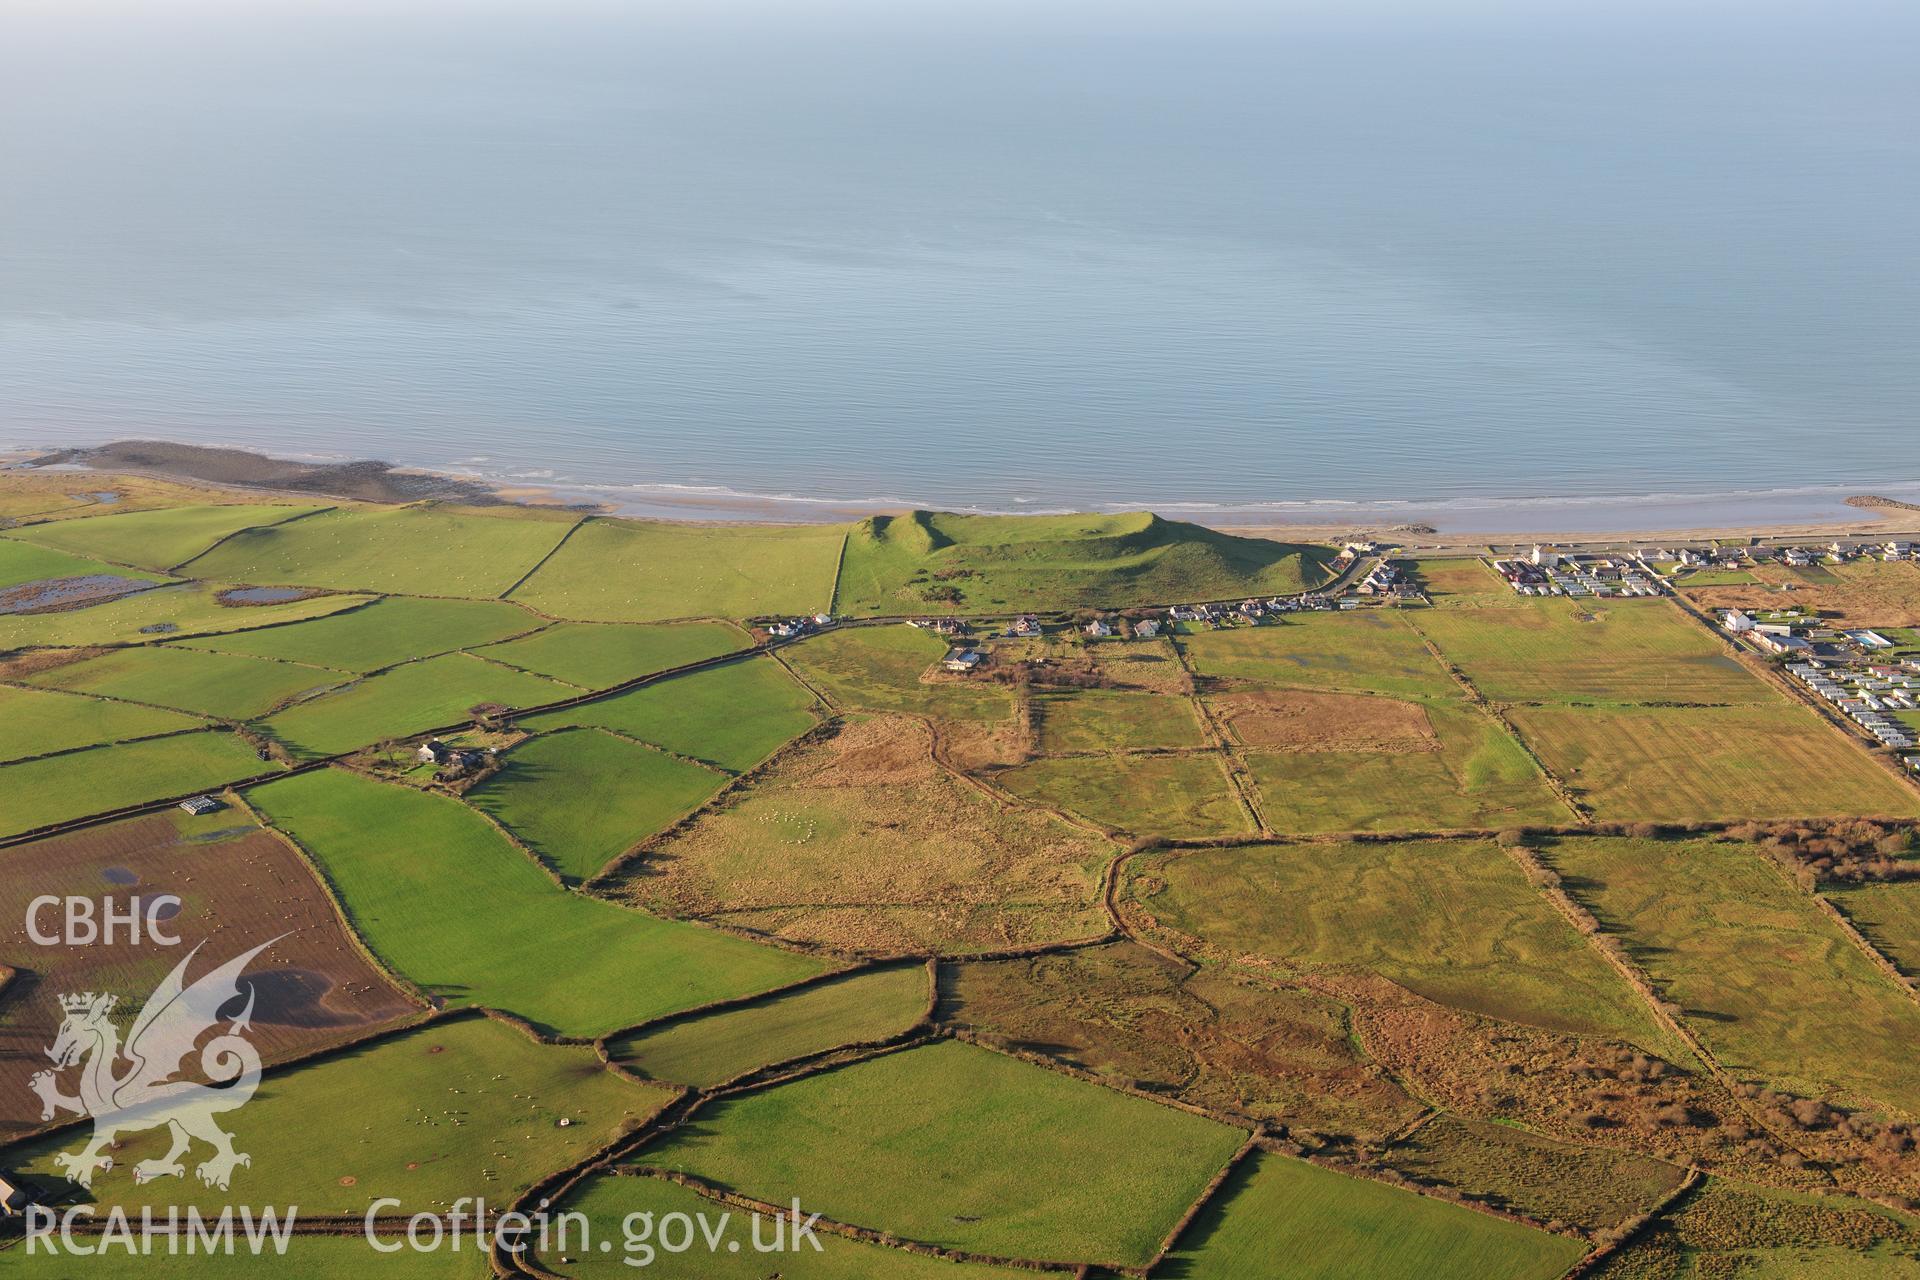 RCAHMW colour oblique photograph of Dinas Dinlle hillfort. Taken by Toby Driver on 10/12/2012.